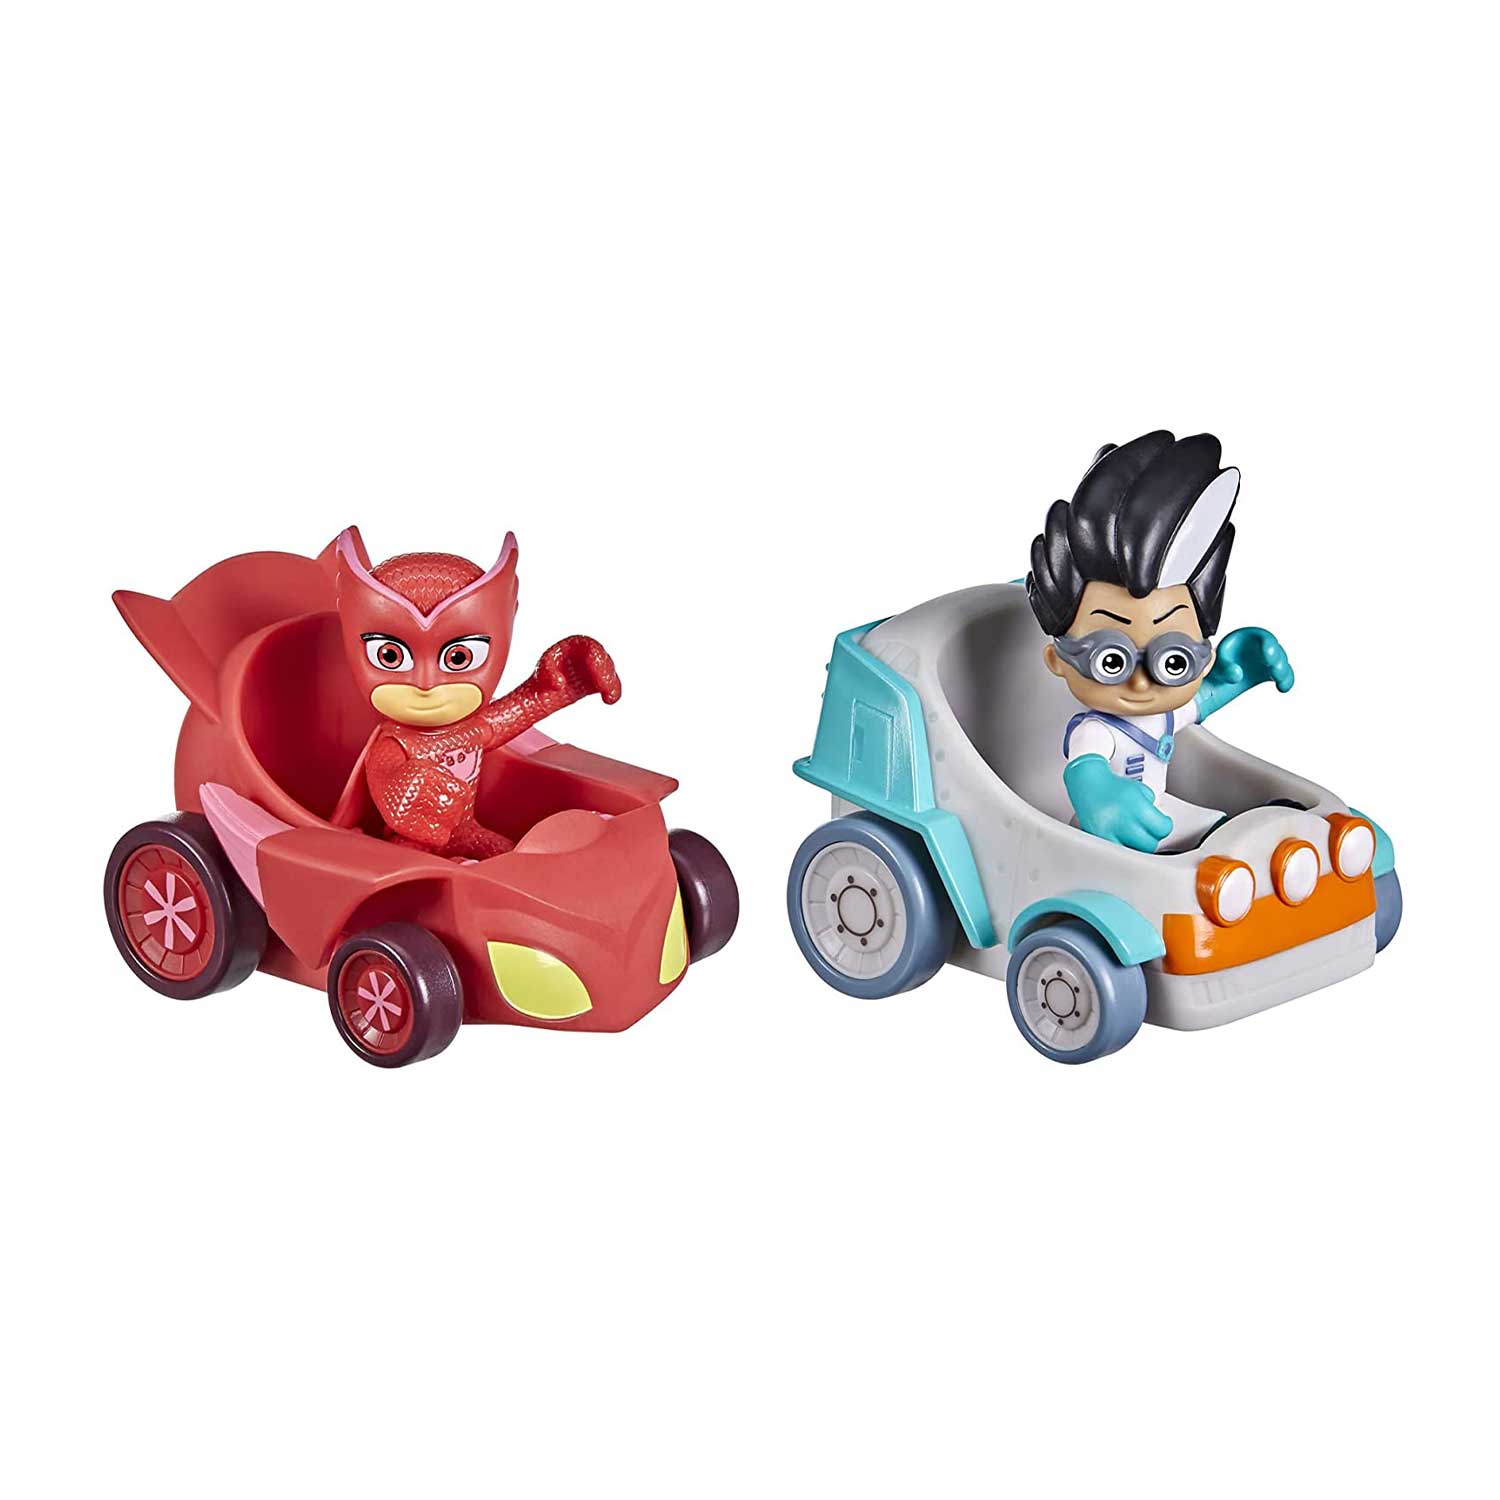 PJ Masks Owlette vs Romeo Battle Racers Preschool Toy, Vehicle and Action Figure Set for Kids Ages 3 and Up - Mod: HSBF28425L0